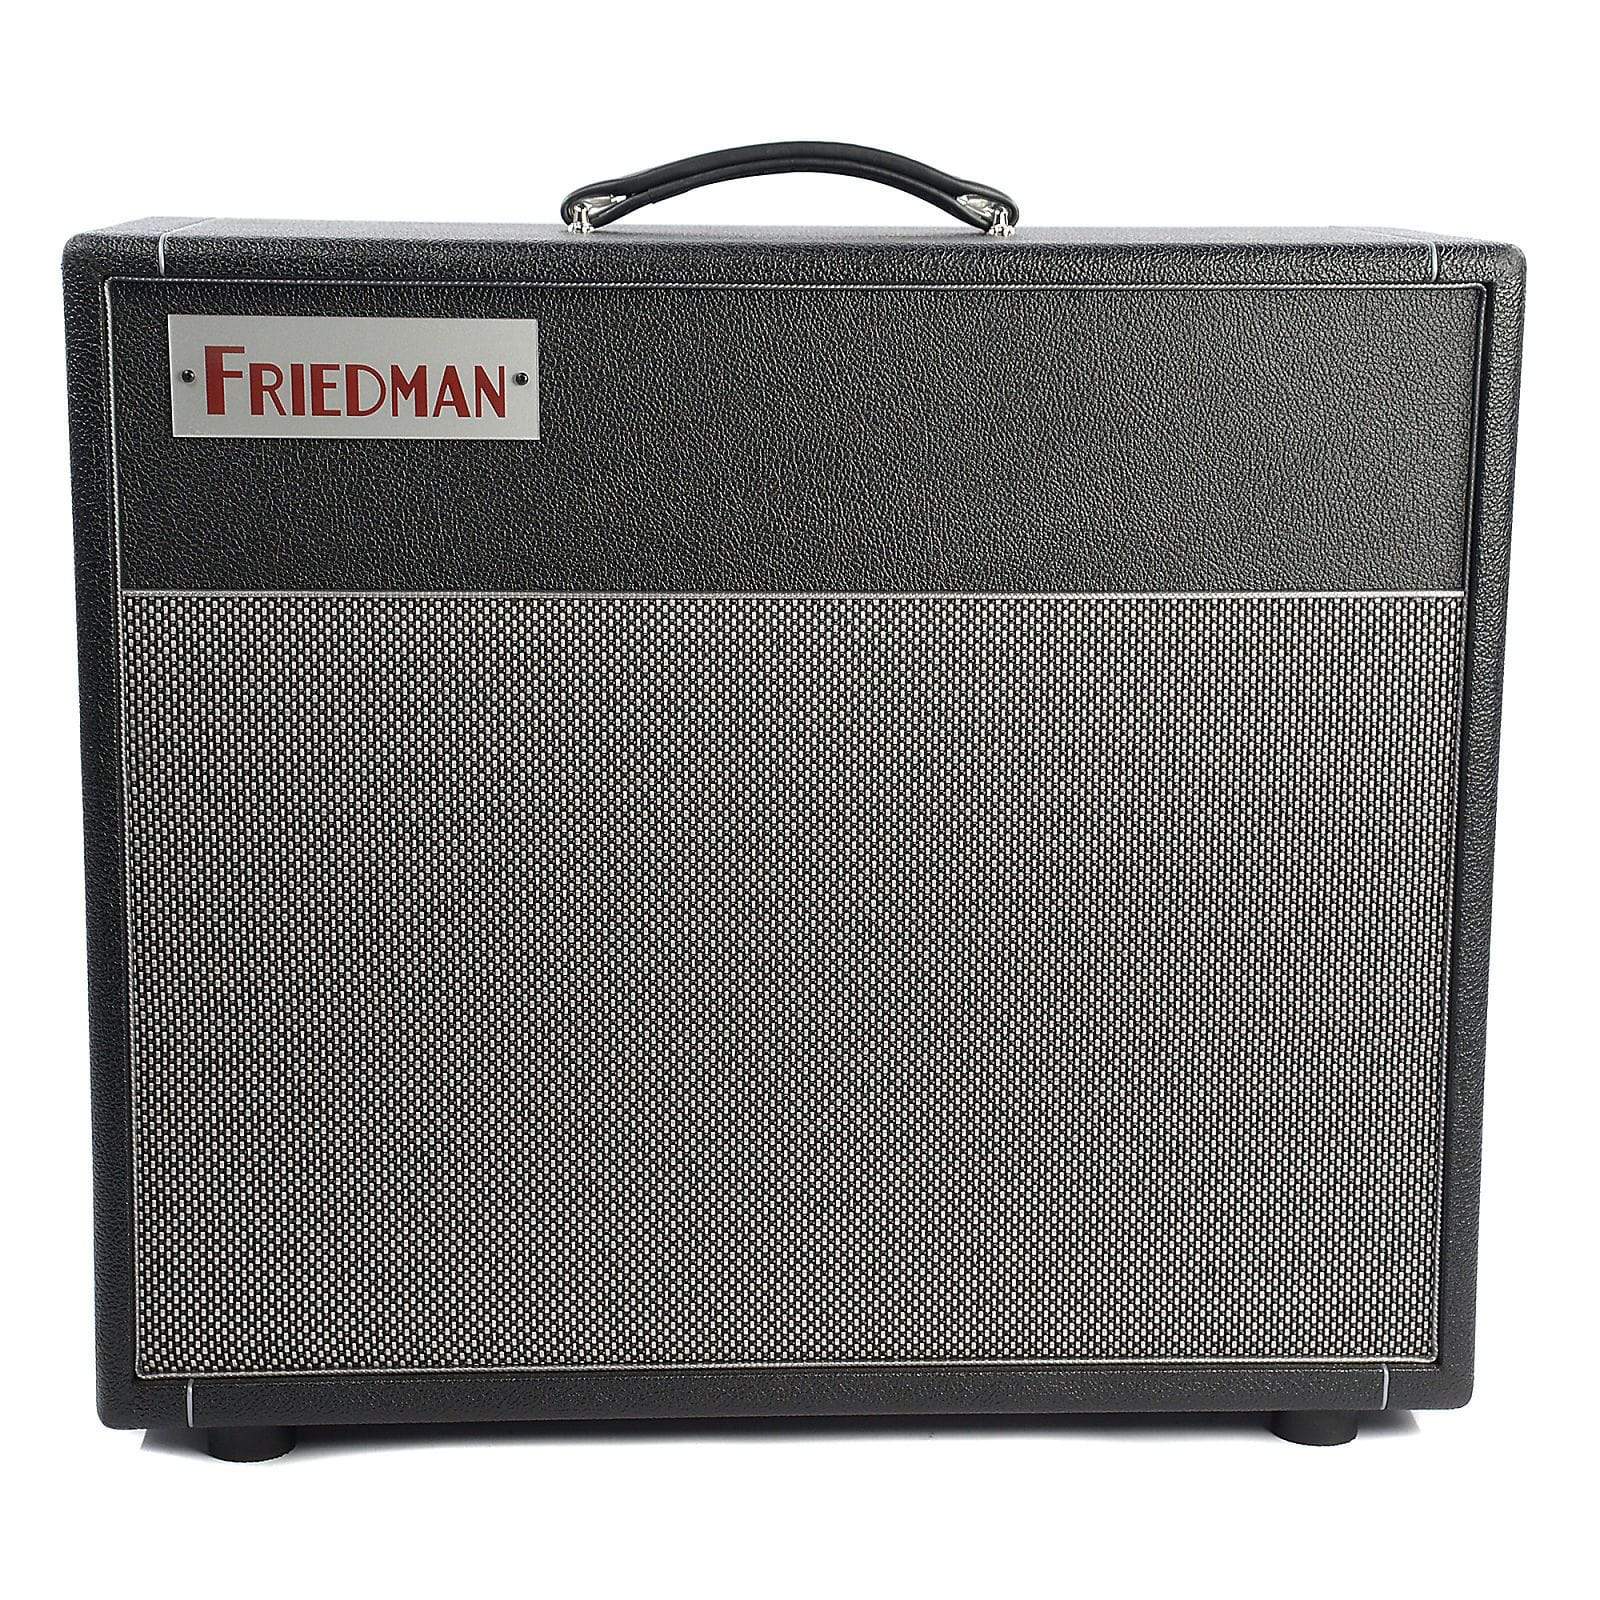 Friedman Dirty Shirley 1x12 Cabinet w/Celestion Creamback Amps / Guitar Cabinets